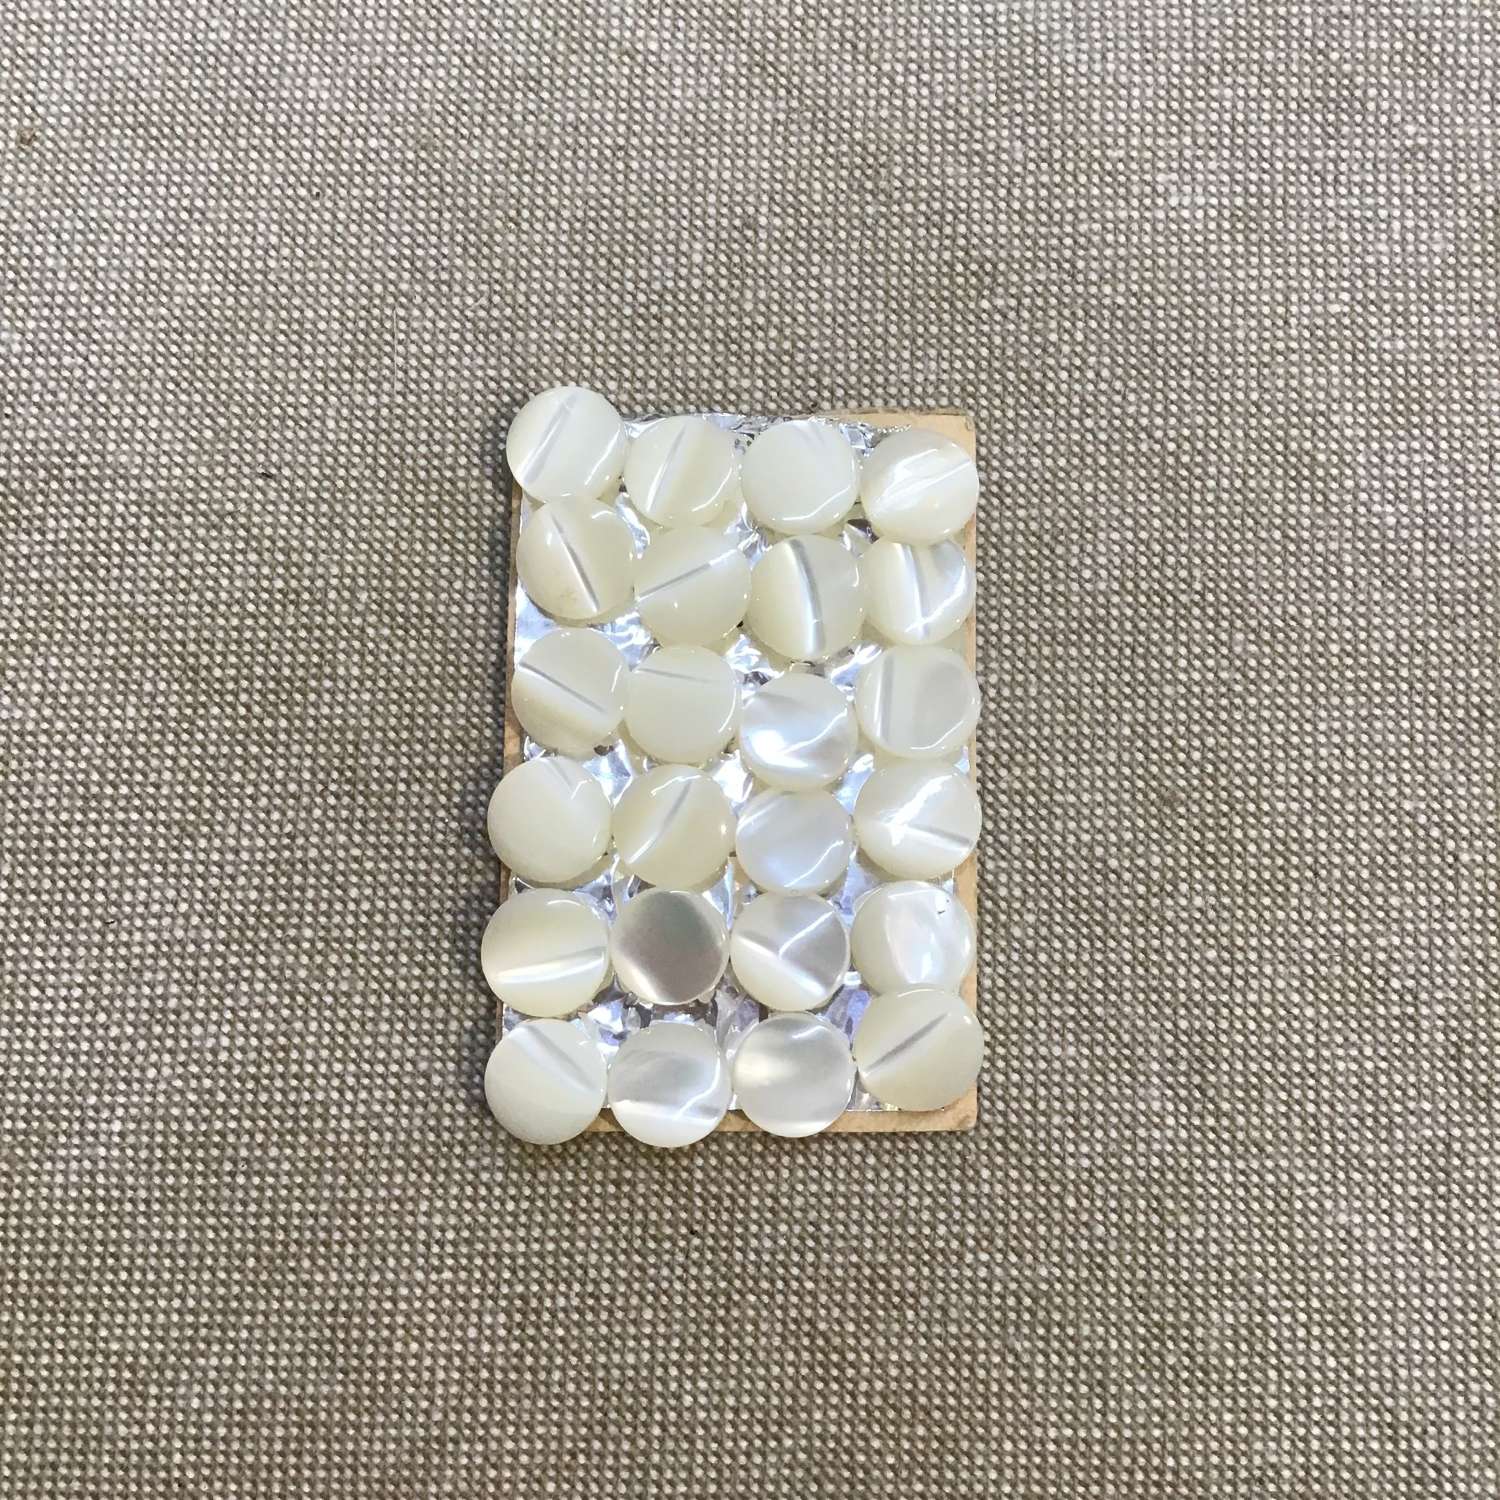 24 small mother of pearl buttons 0.7cm diameter